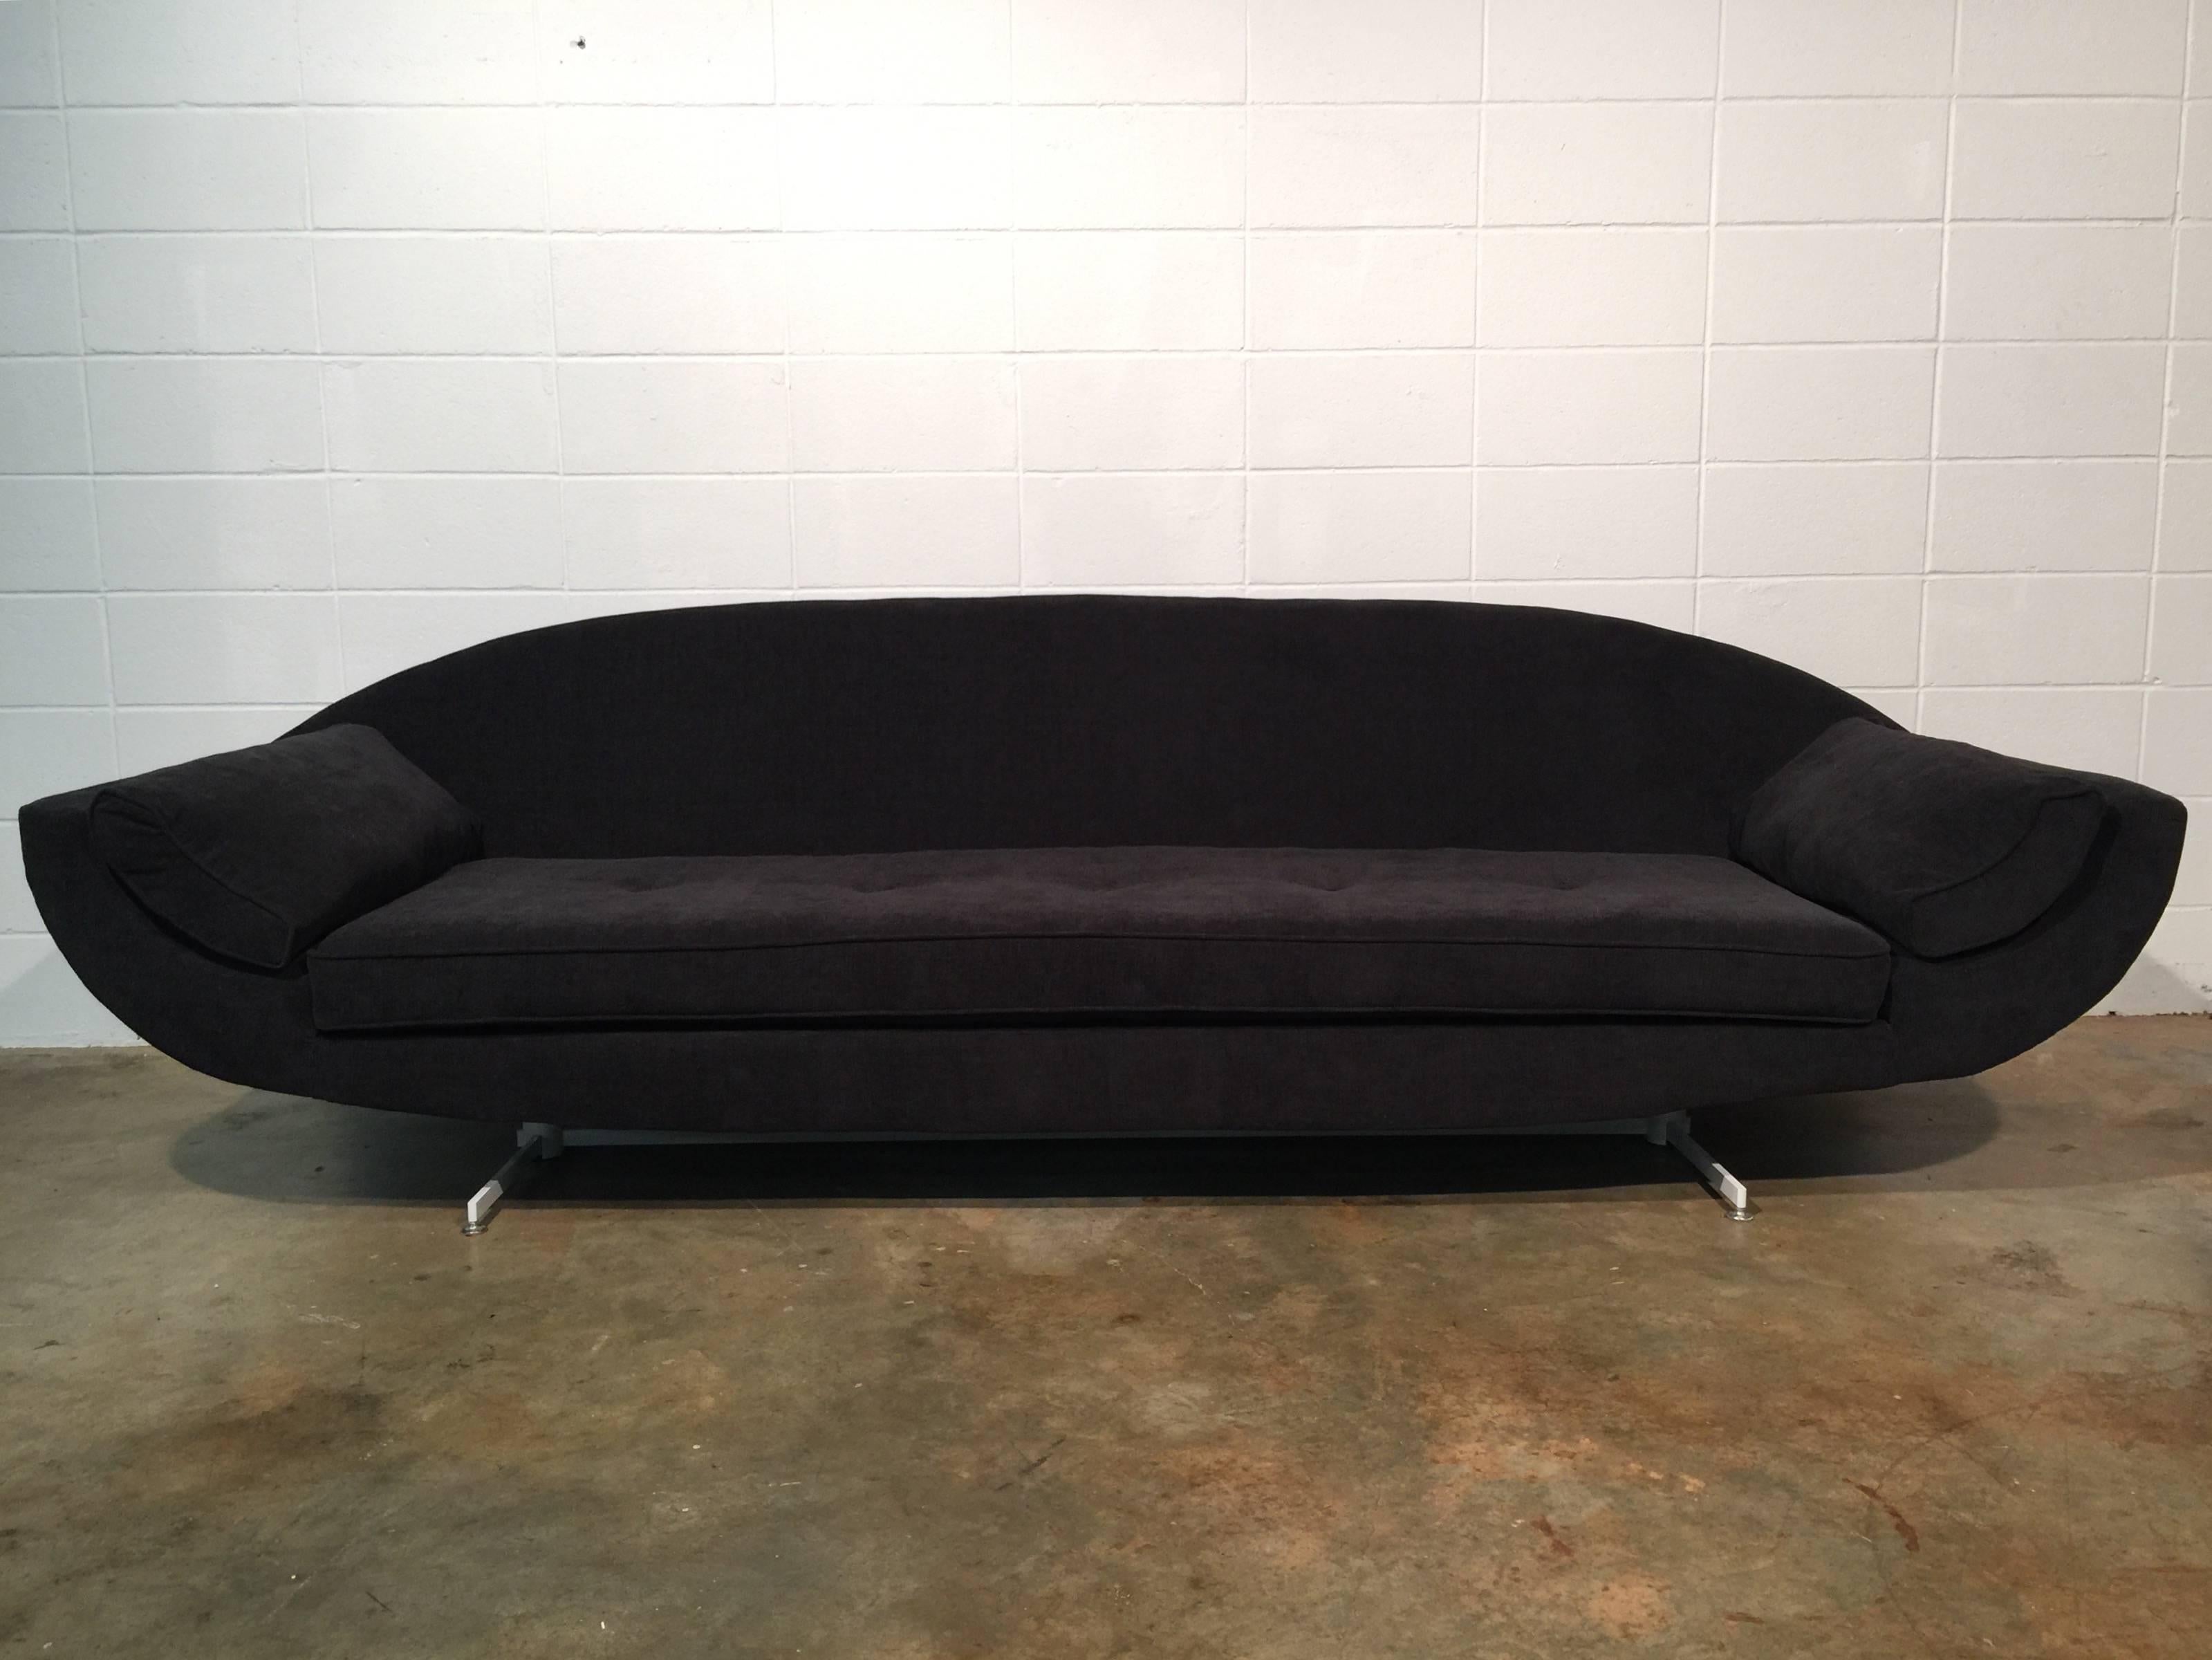 Restored Mid-Century Modern Gondola sofa with a unique metal base. This sofa has been restored from top to bottom. Restoration includes all new foam, new black chenille fabric, a freshly lacquered base, and four down filled accent pillows. This sofa